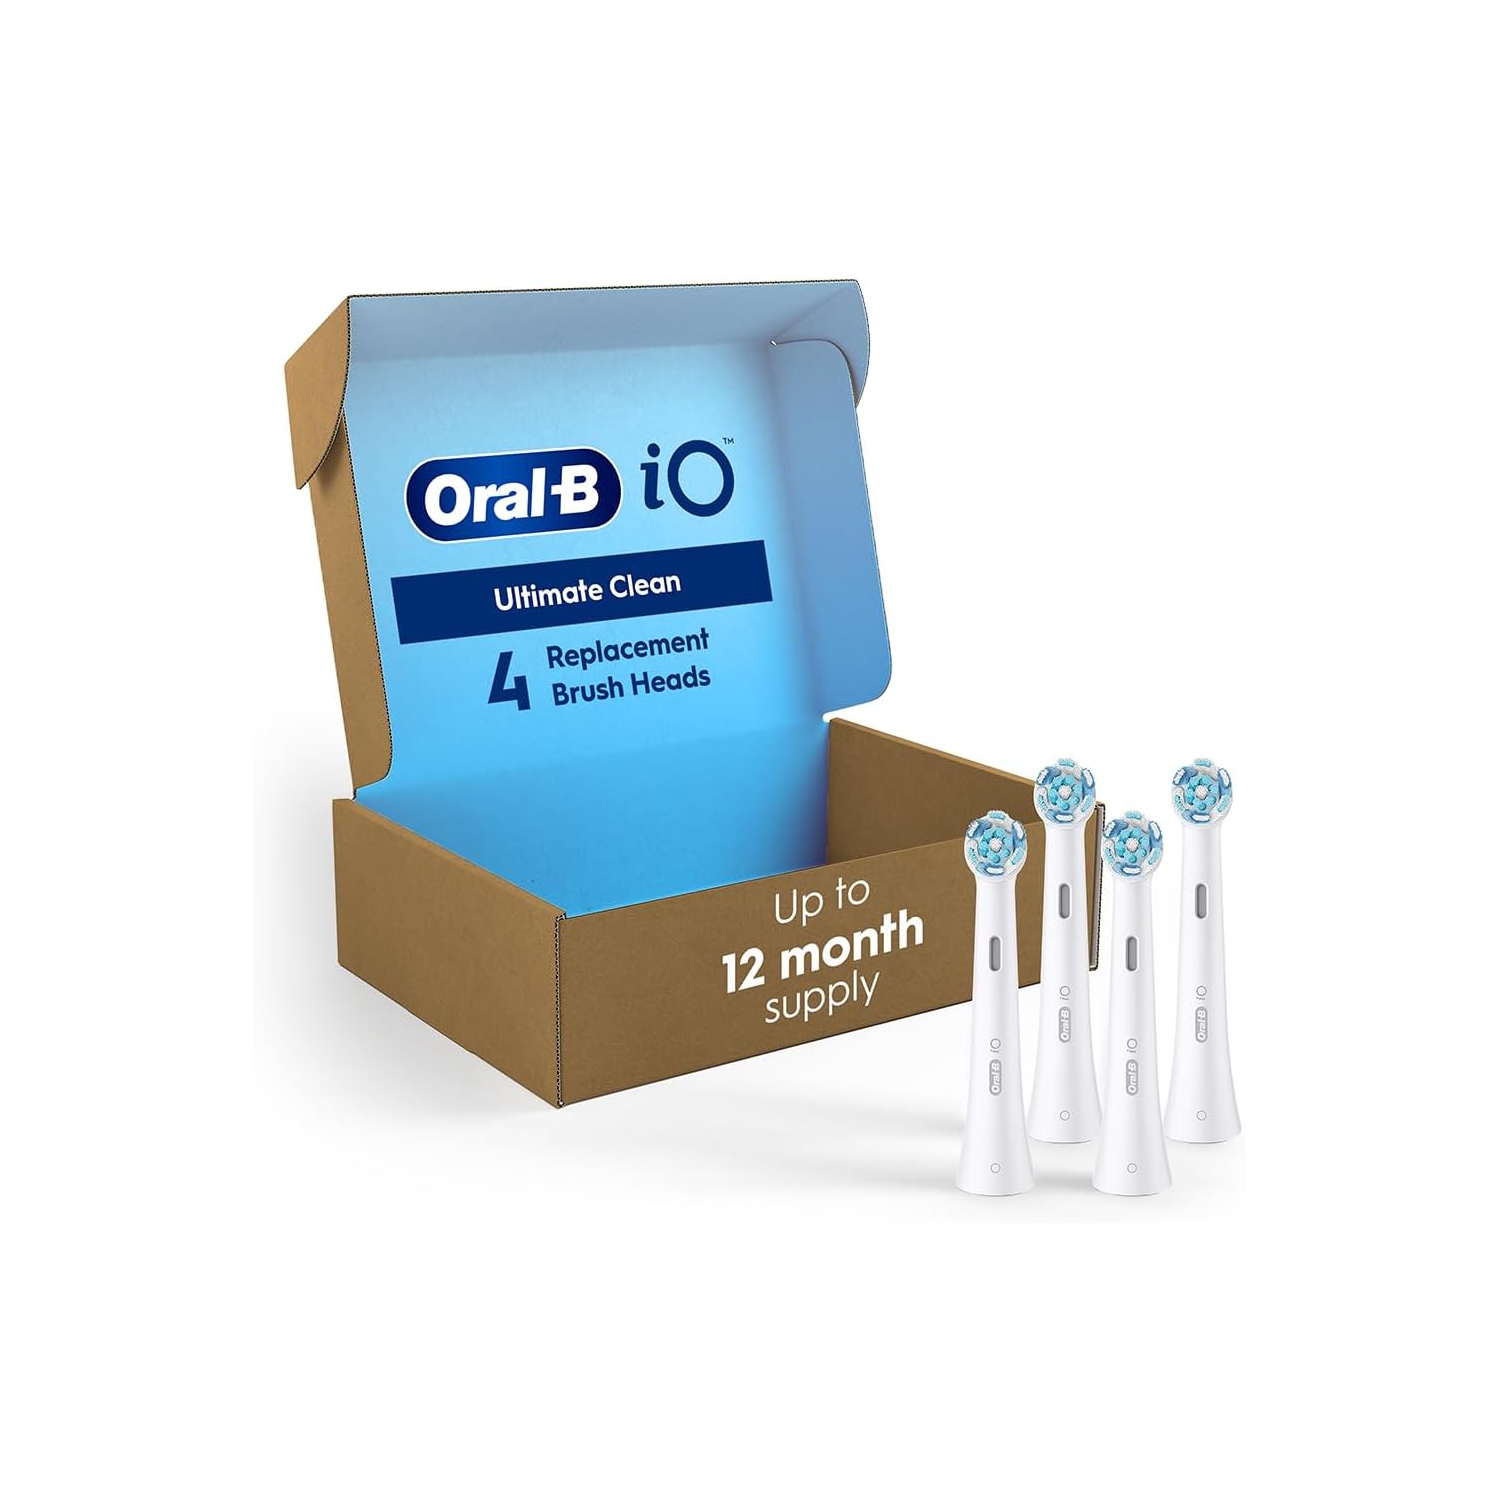 Oral-B iO Ultimate Clean Replacement Brush Heads, White, Refills for Oral-B iO Series Electric Toothbrushes, 4 Count